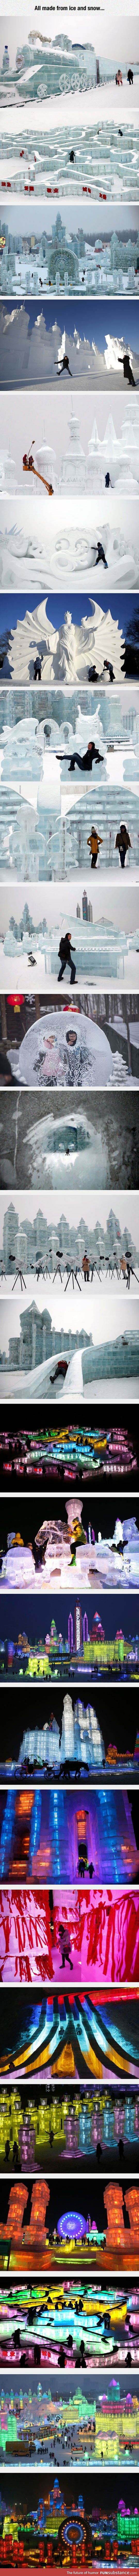 Mini Cities Made From Ice And Snow For Display